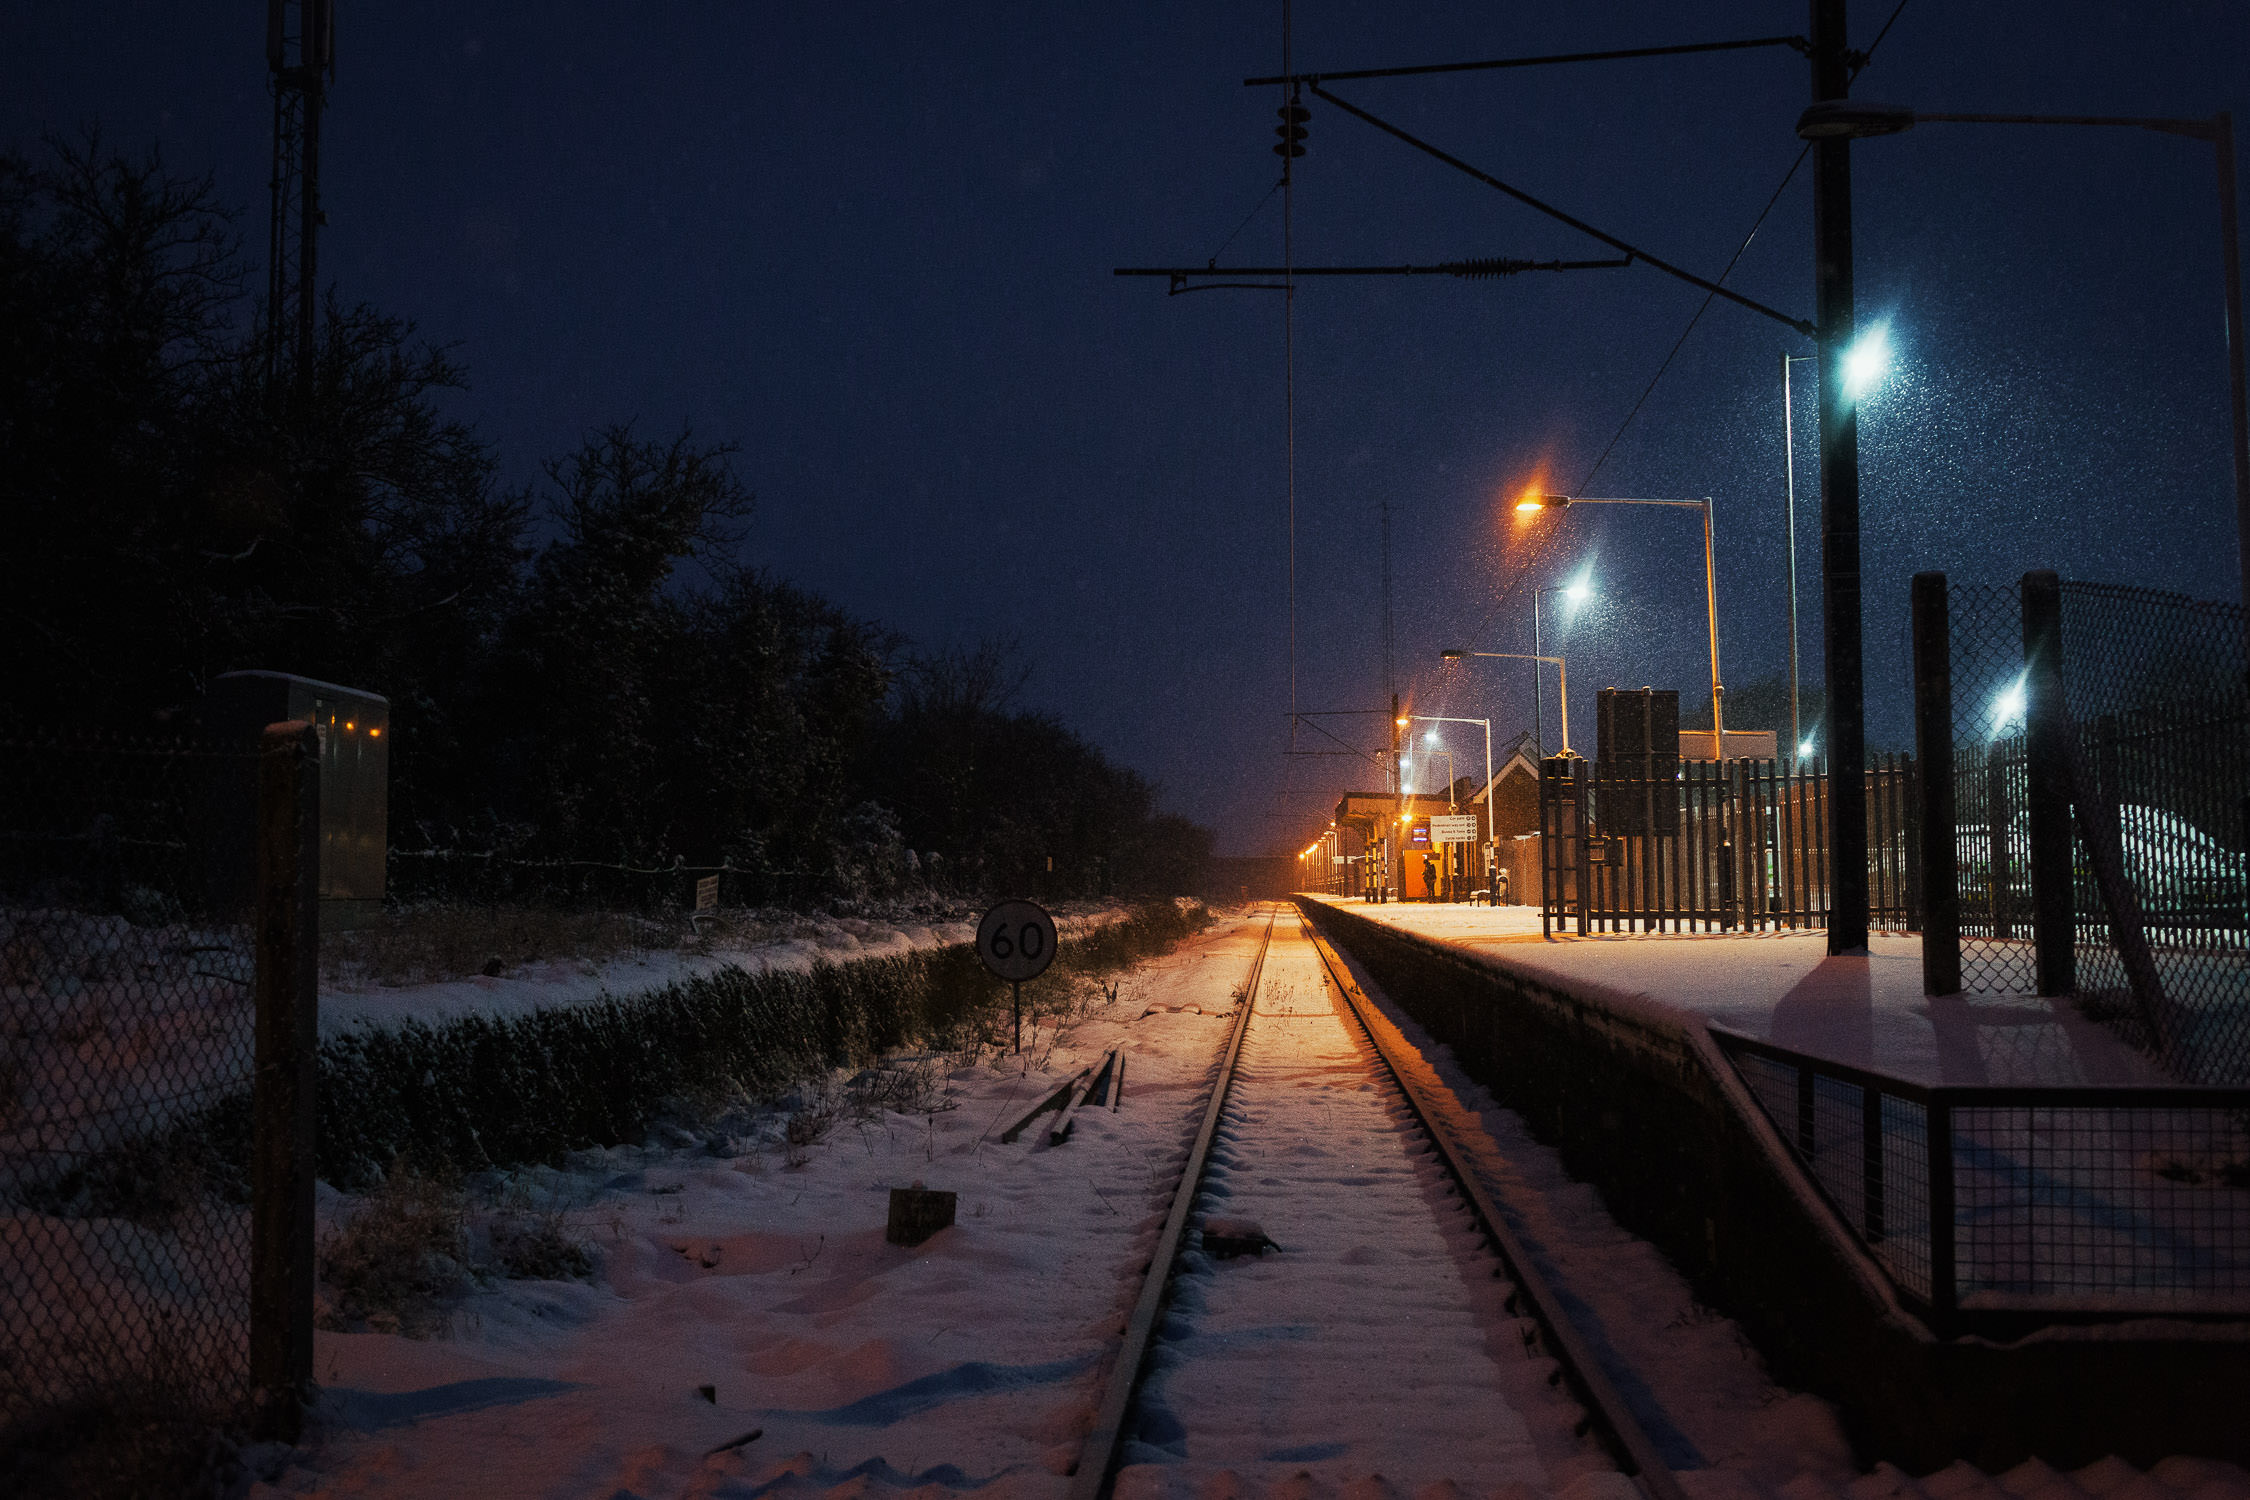 The railway line in South Woodham Ferrers in Essex. It is snowing at night.